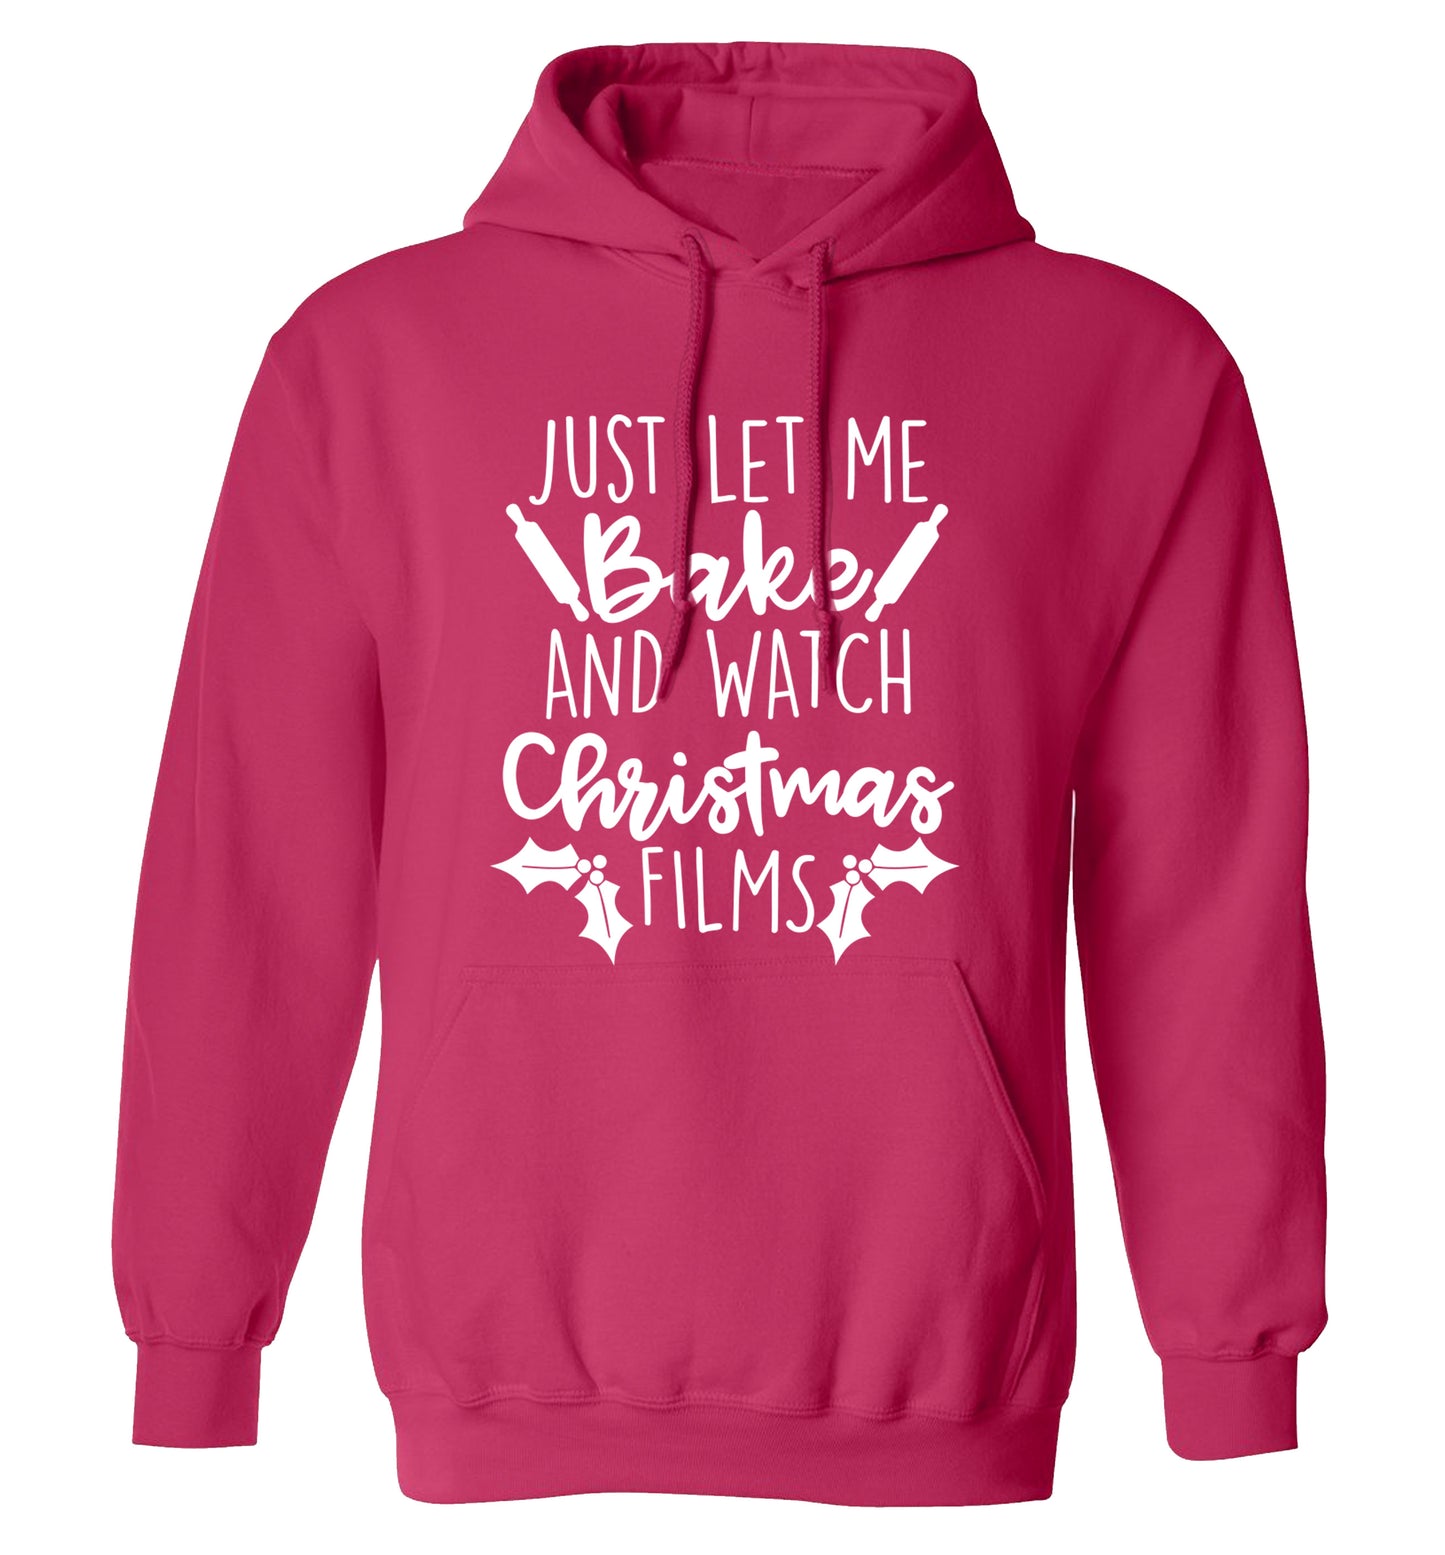 Just let me bake and watch Christmas films adults unisex pink hoodie 2XL